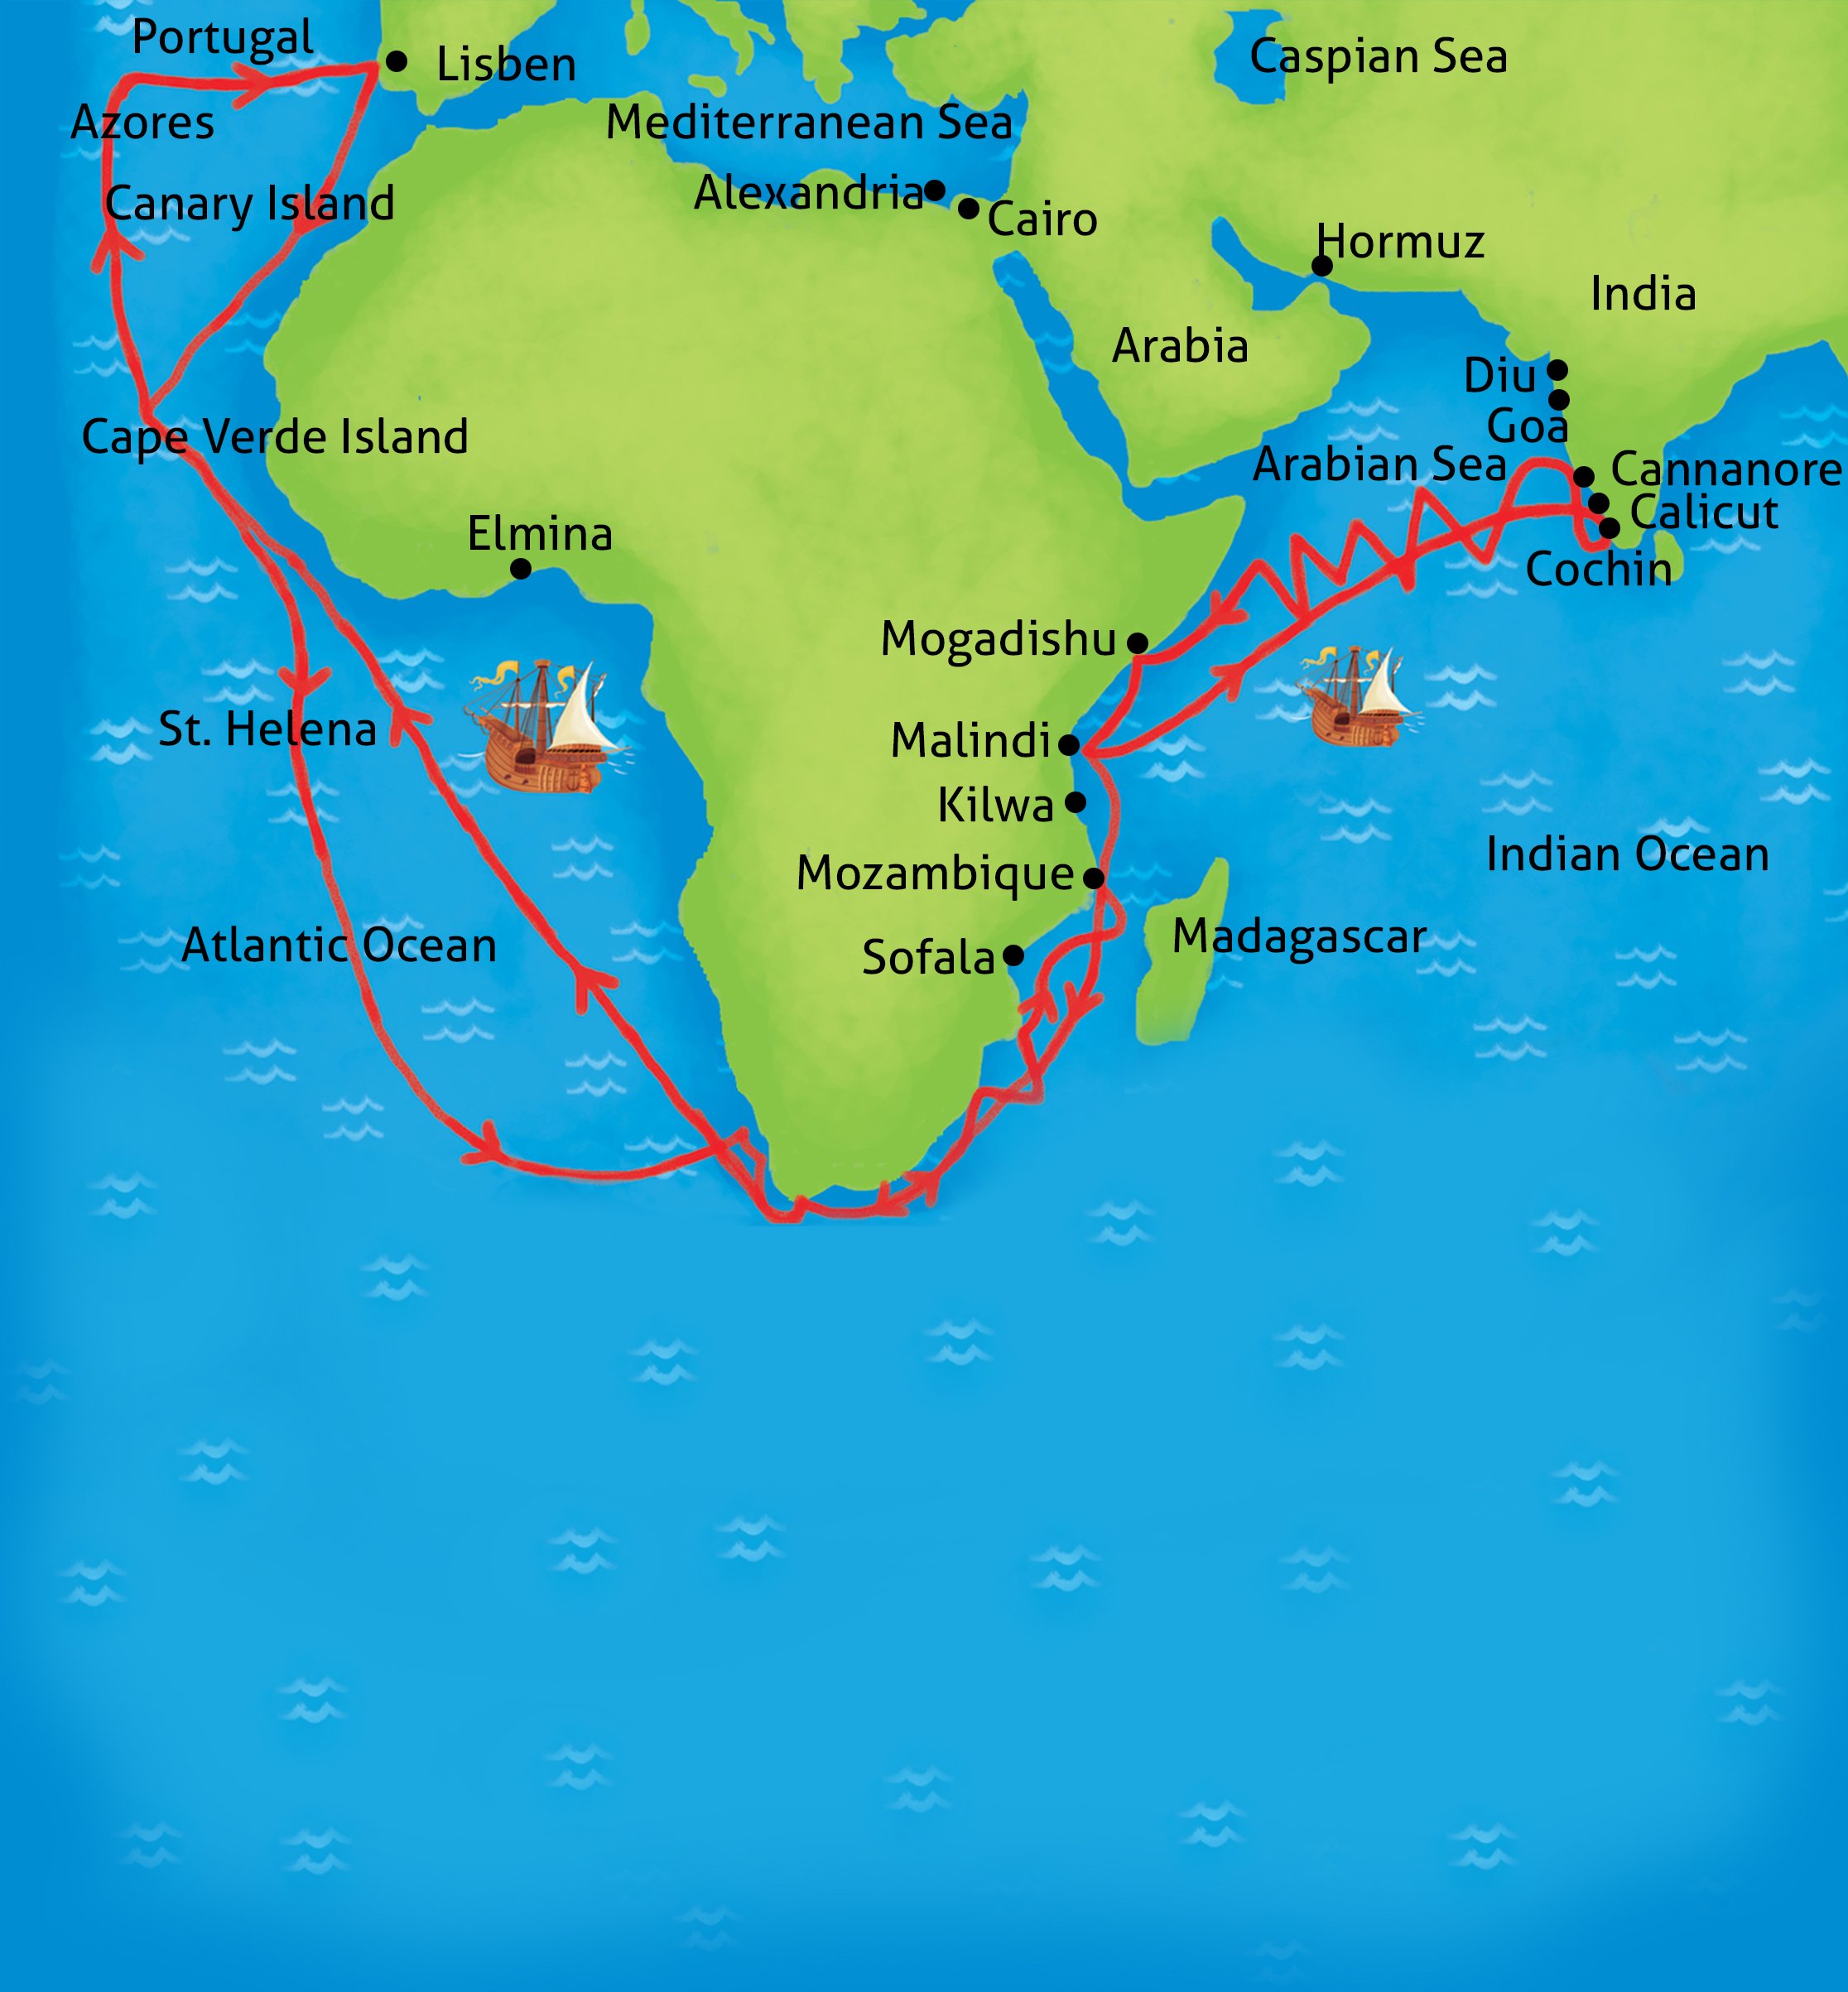 what kind of influence did vasco da gama have on india